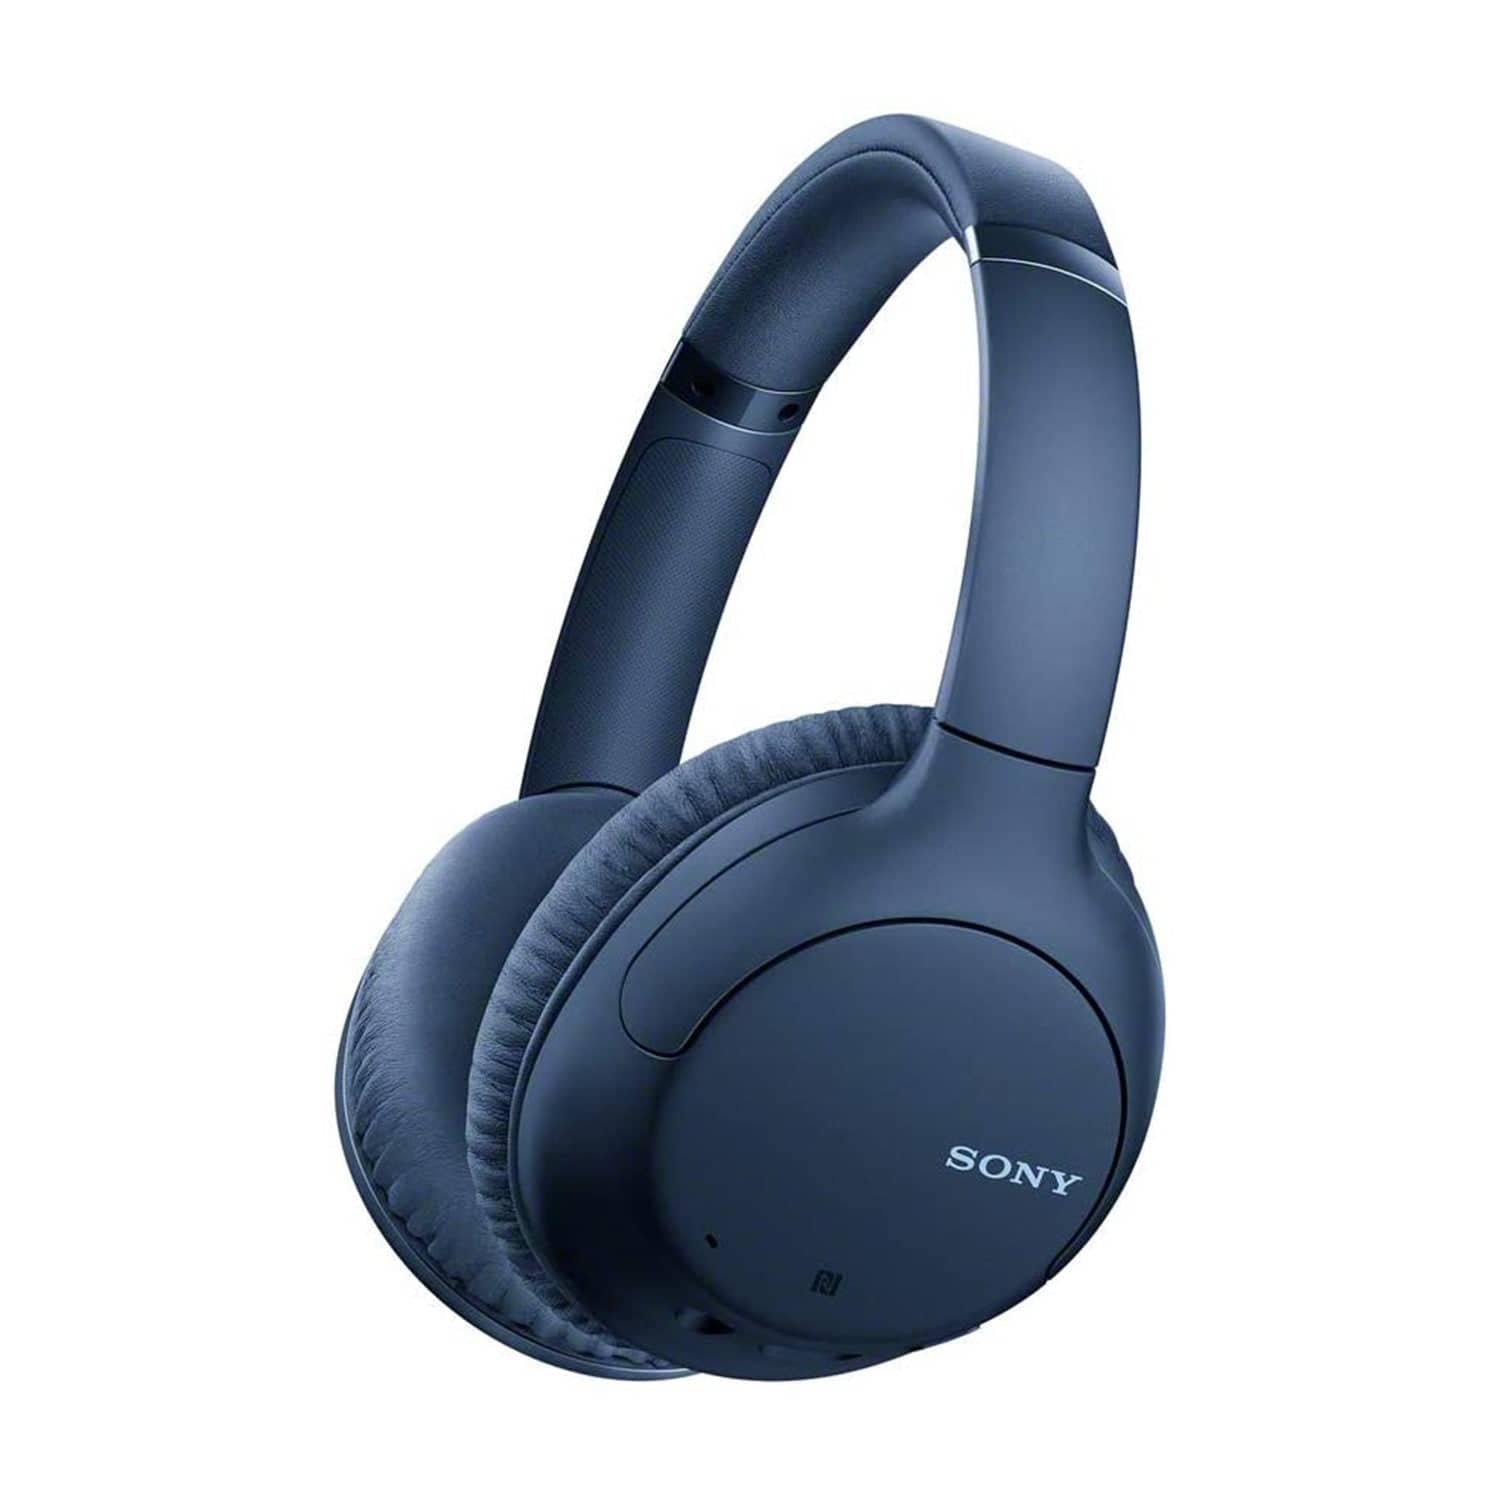 sony-wh-ch710n-noise-cancelling-wireless-headphones-blue-30656885260484_1500x